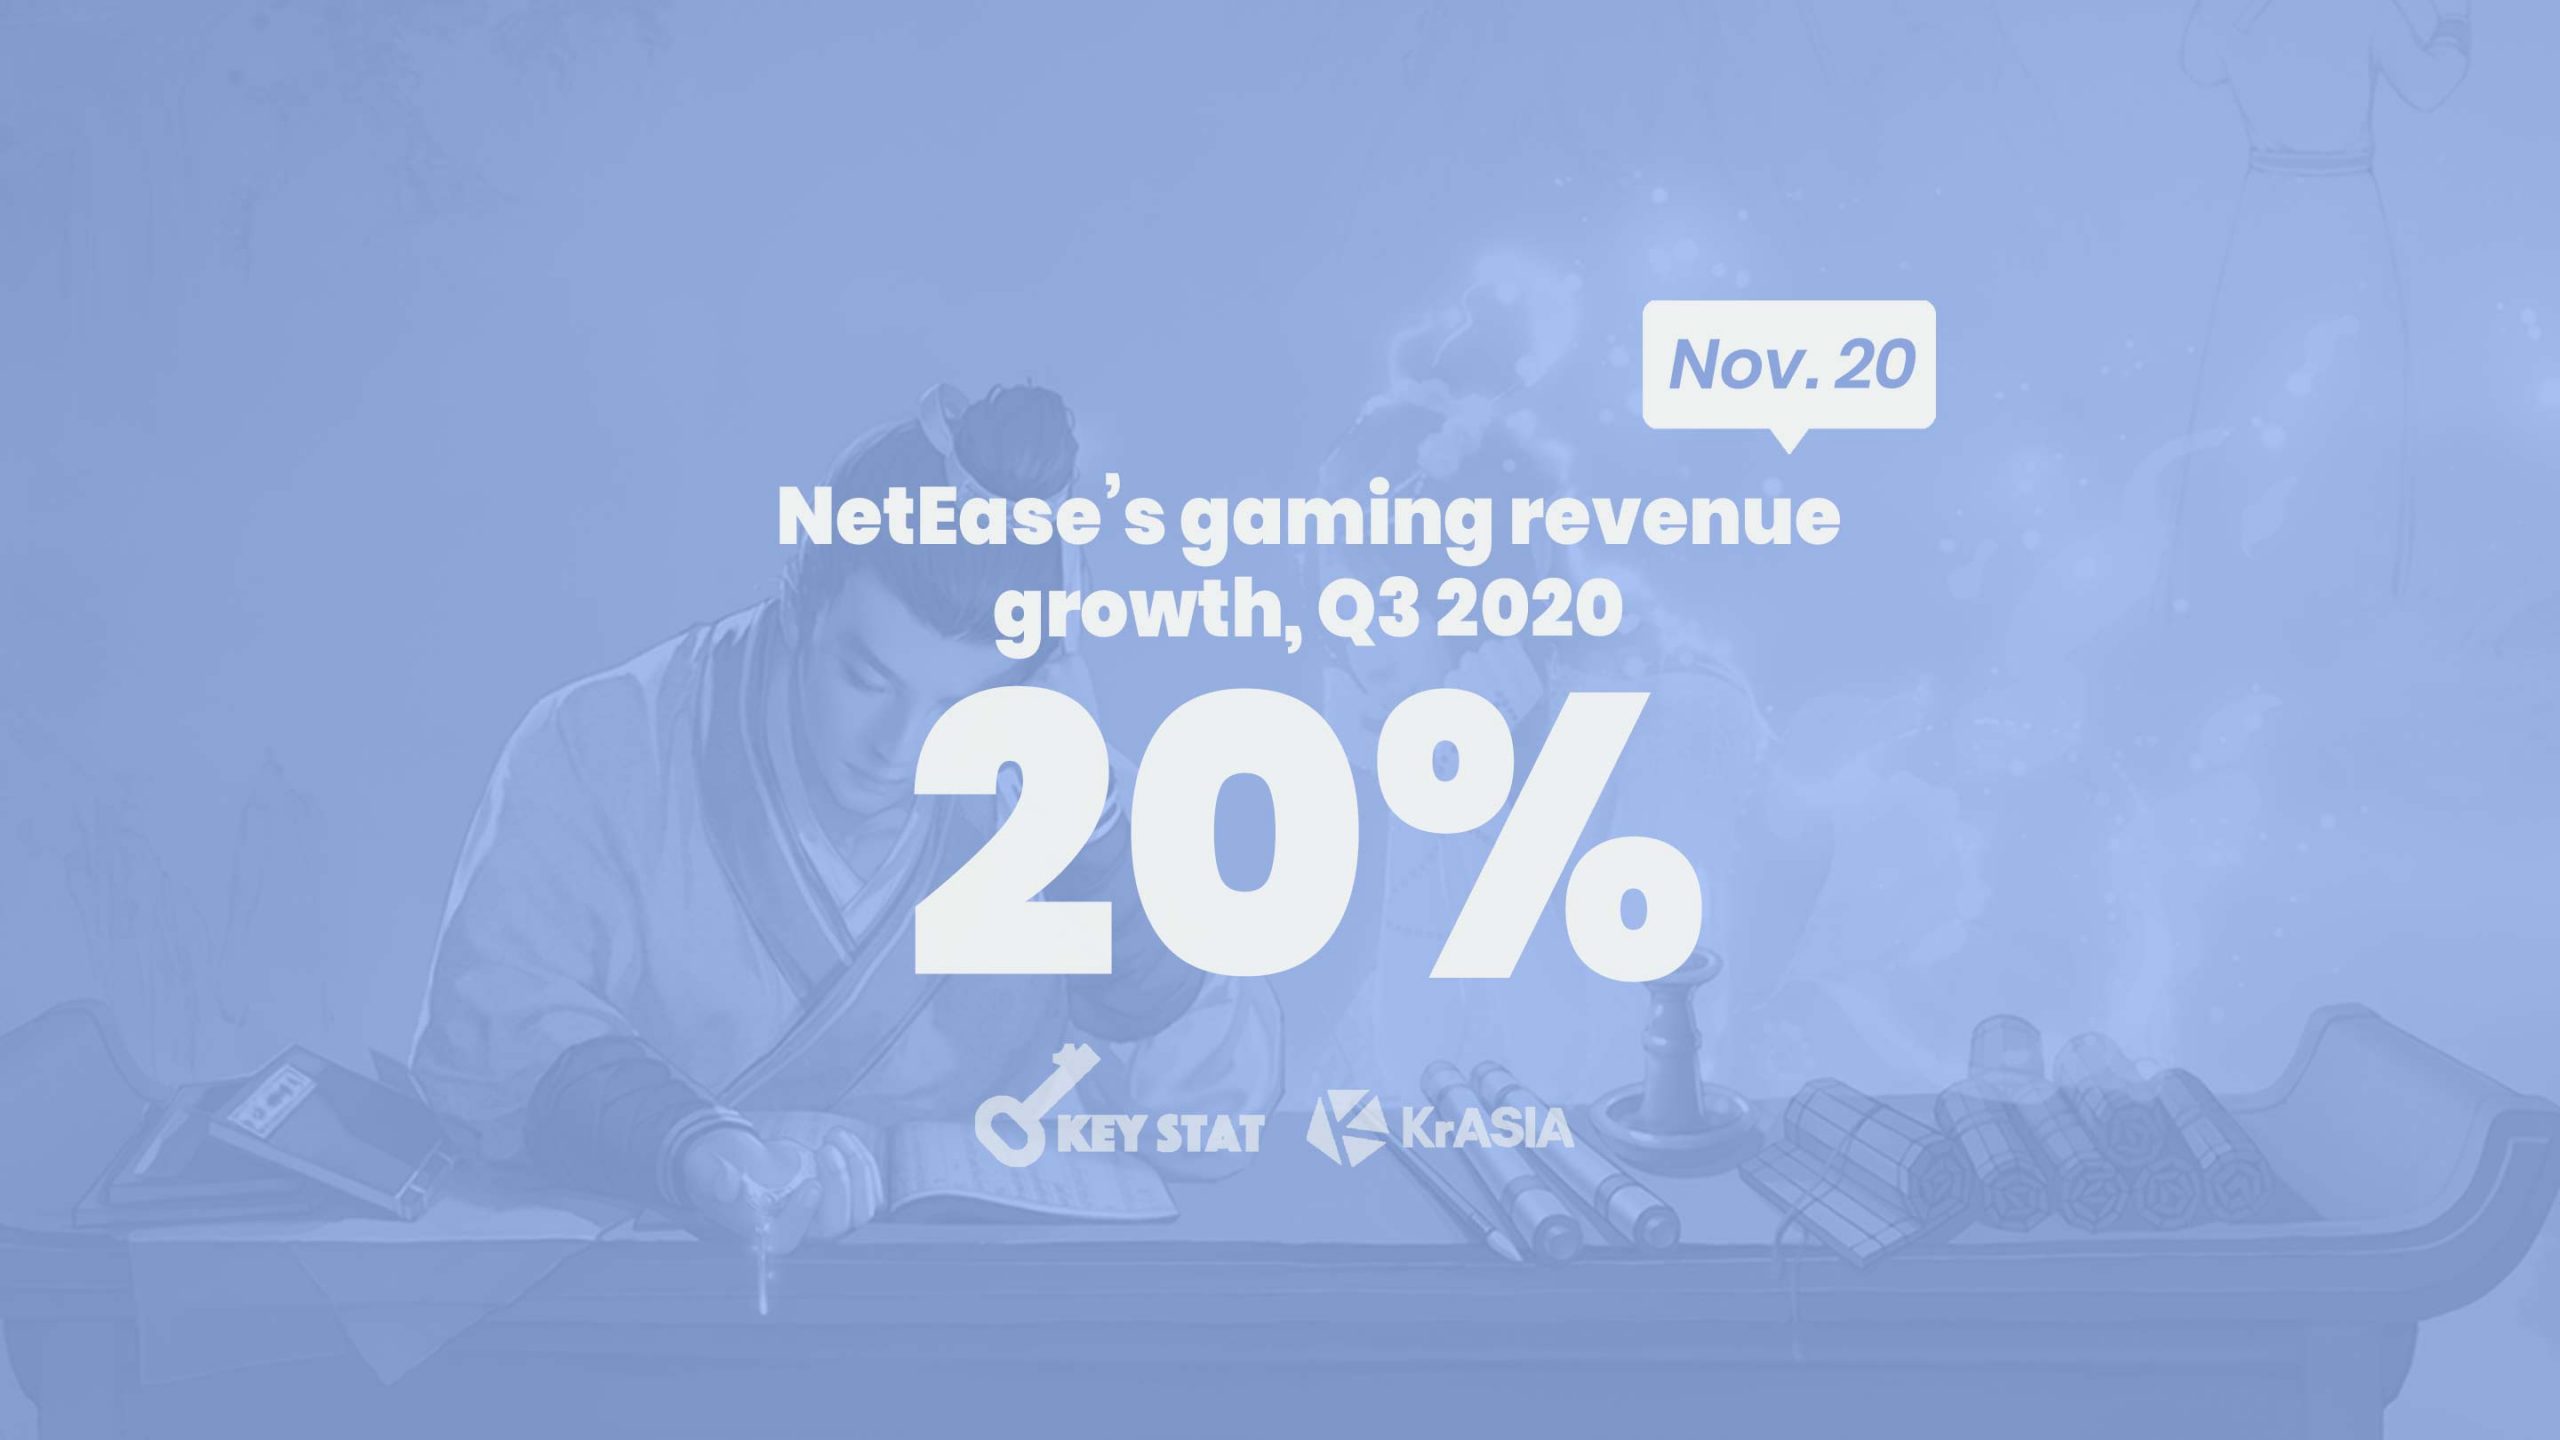 KEY STAT | NetEase posts strong gaming growth in Q3